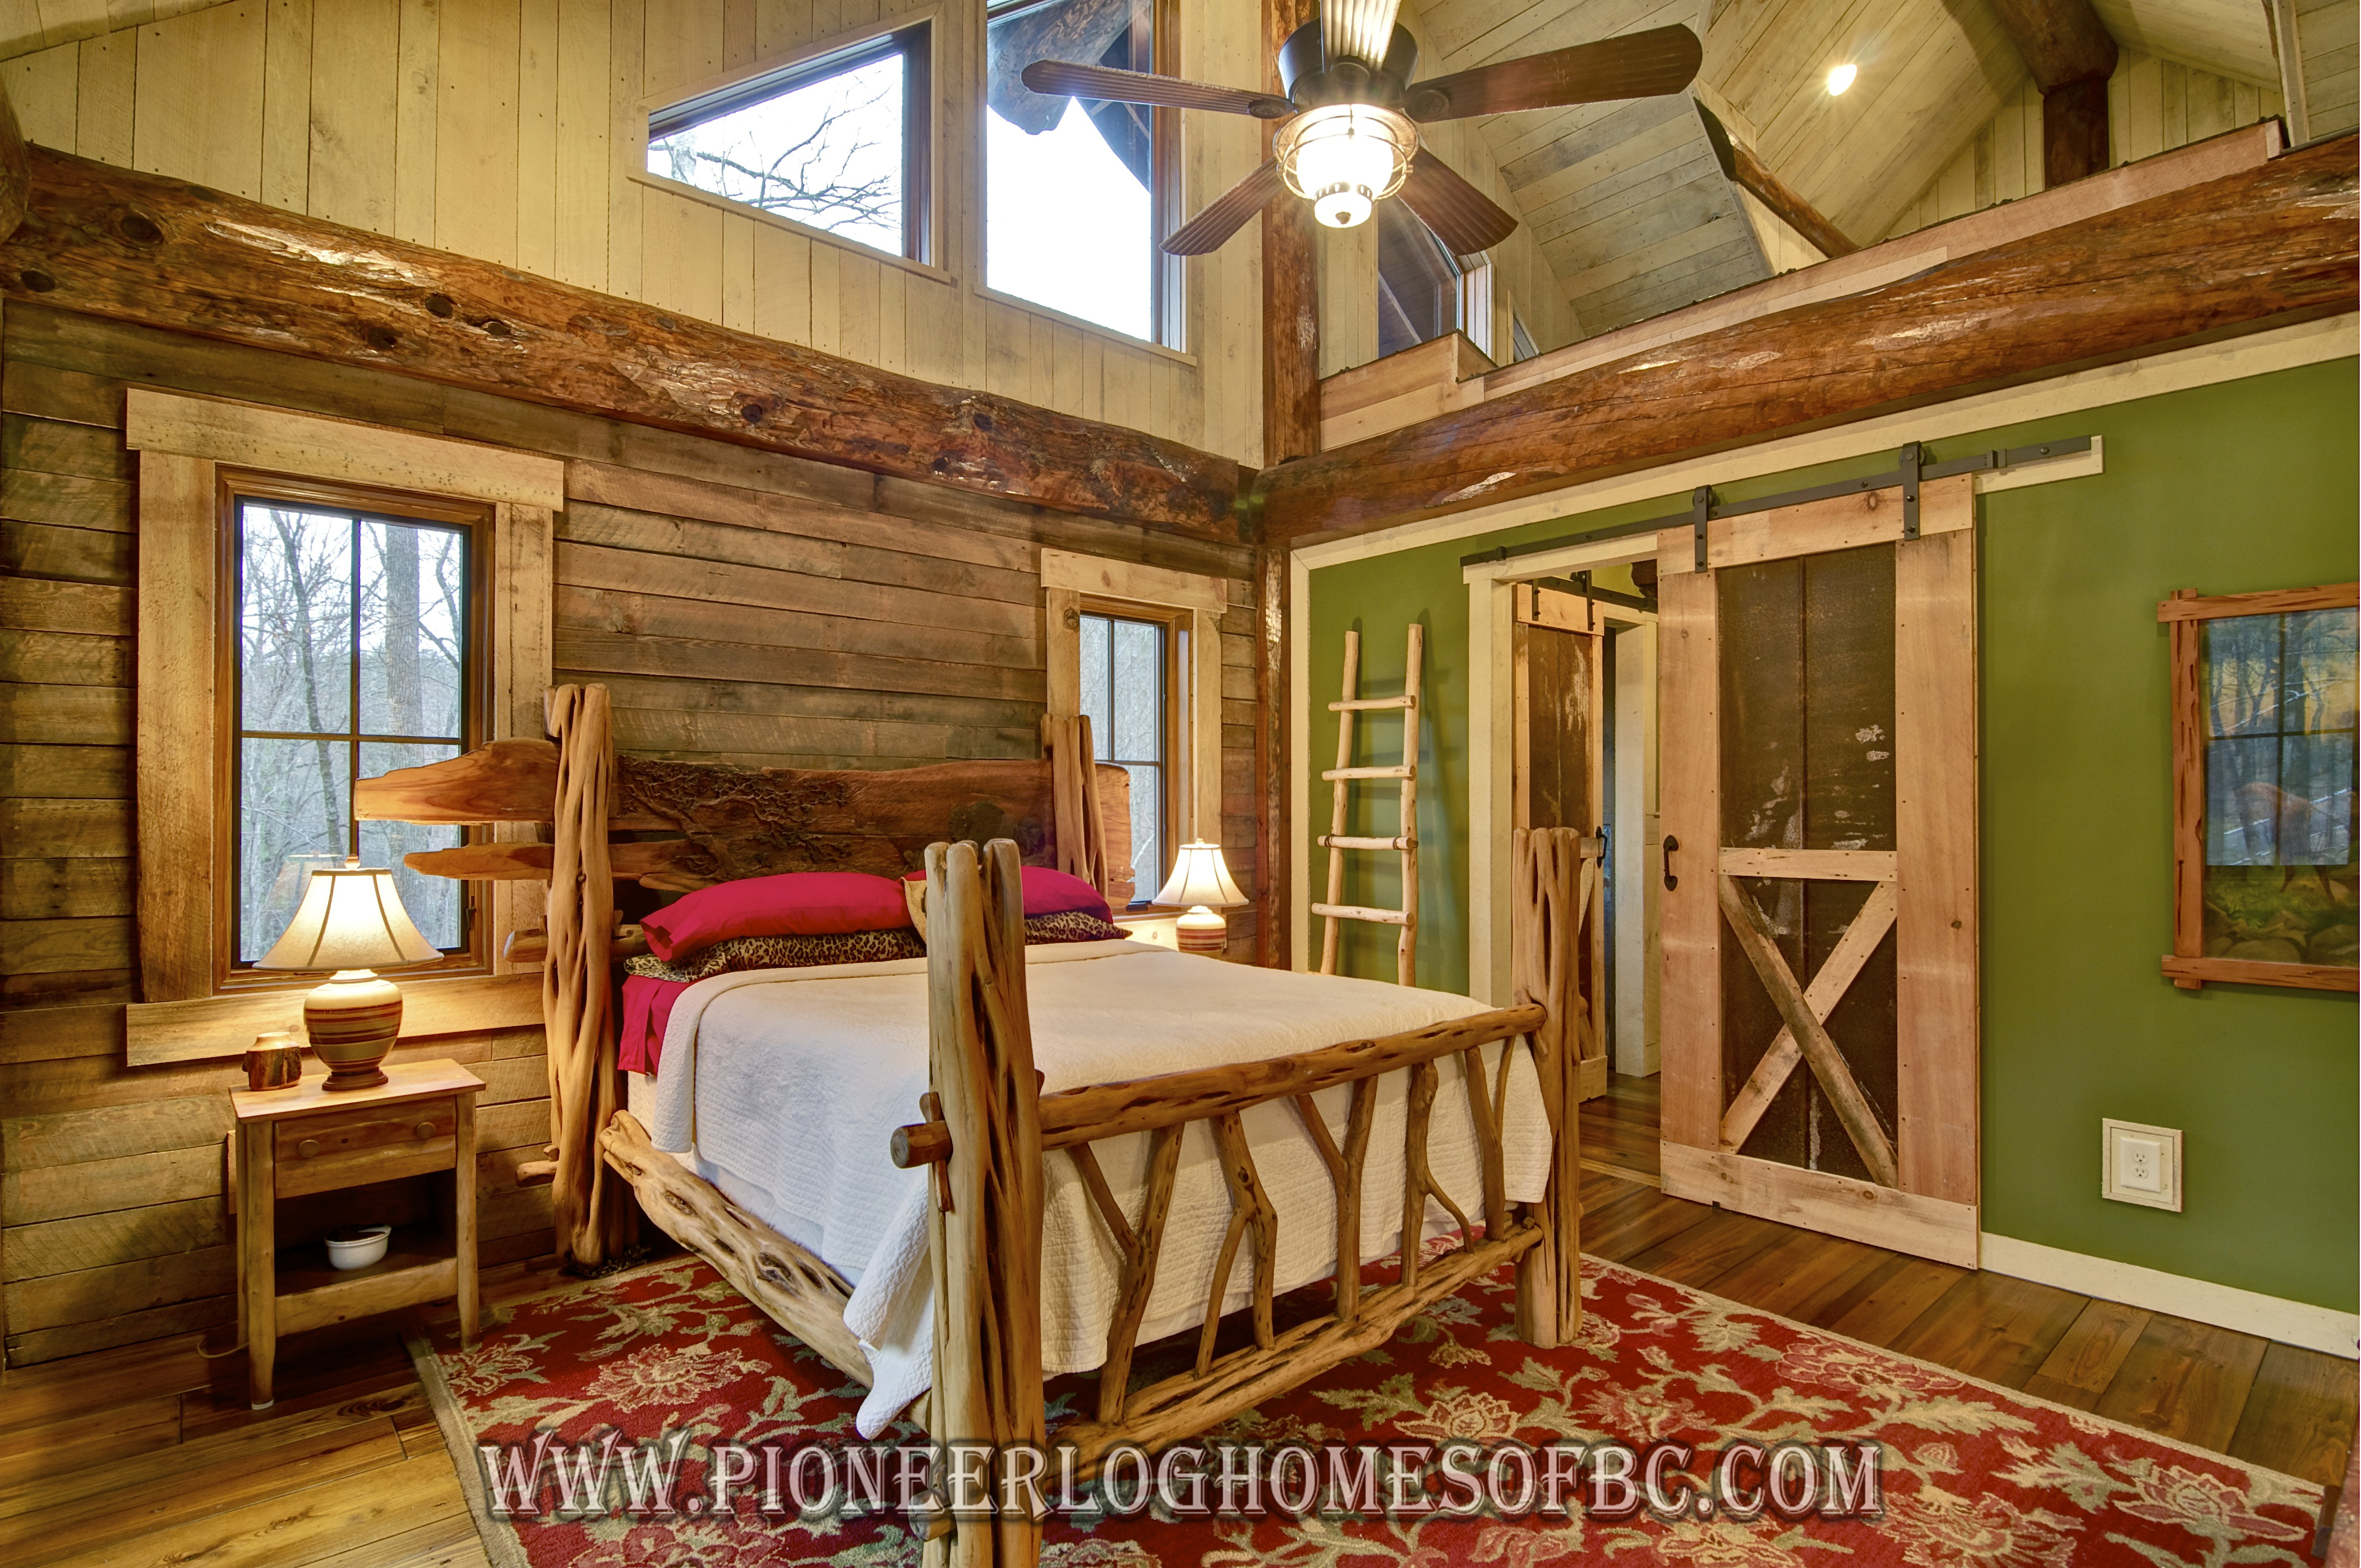 Bedrooms And Bathrooms Log Home And Cabin Interiors